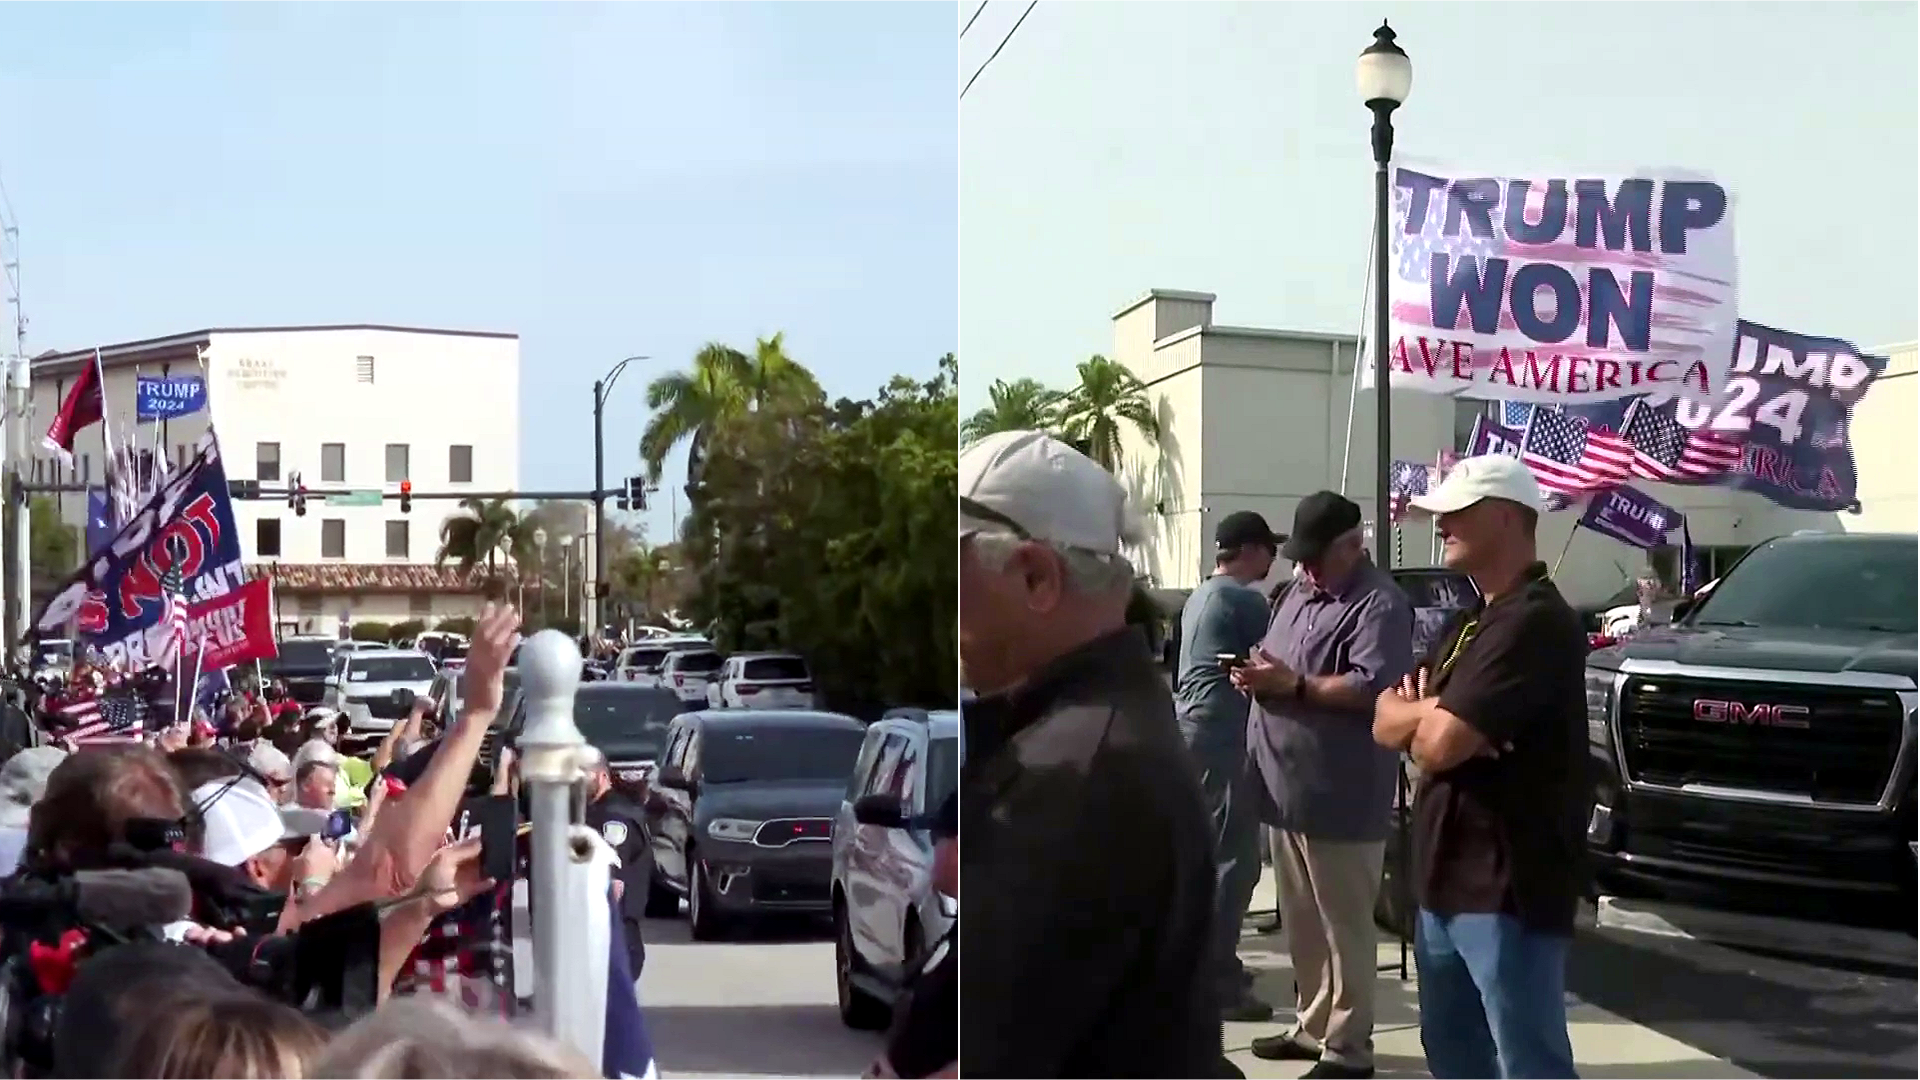 'YEAH BOY!' Trump Fans With 'TRUMP WON' Flags - He Didn't - Go Nuts When Motorcade Pulls Into Court For Hearing